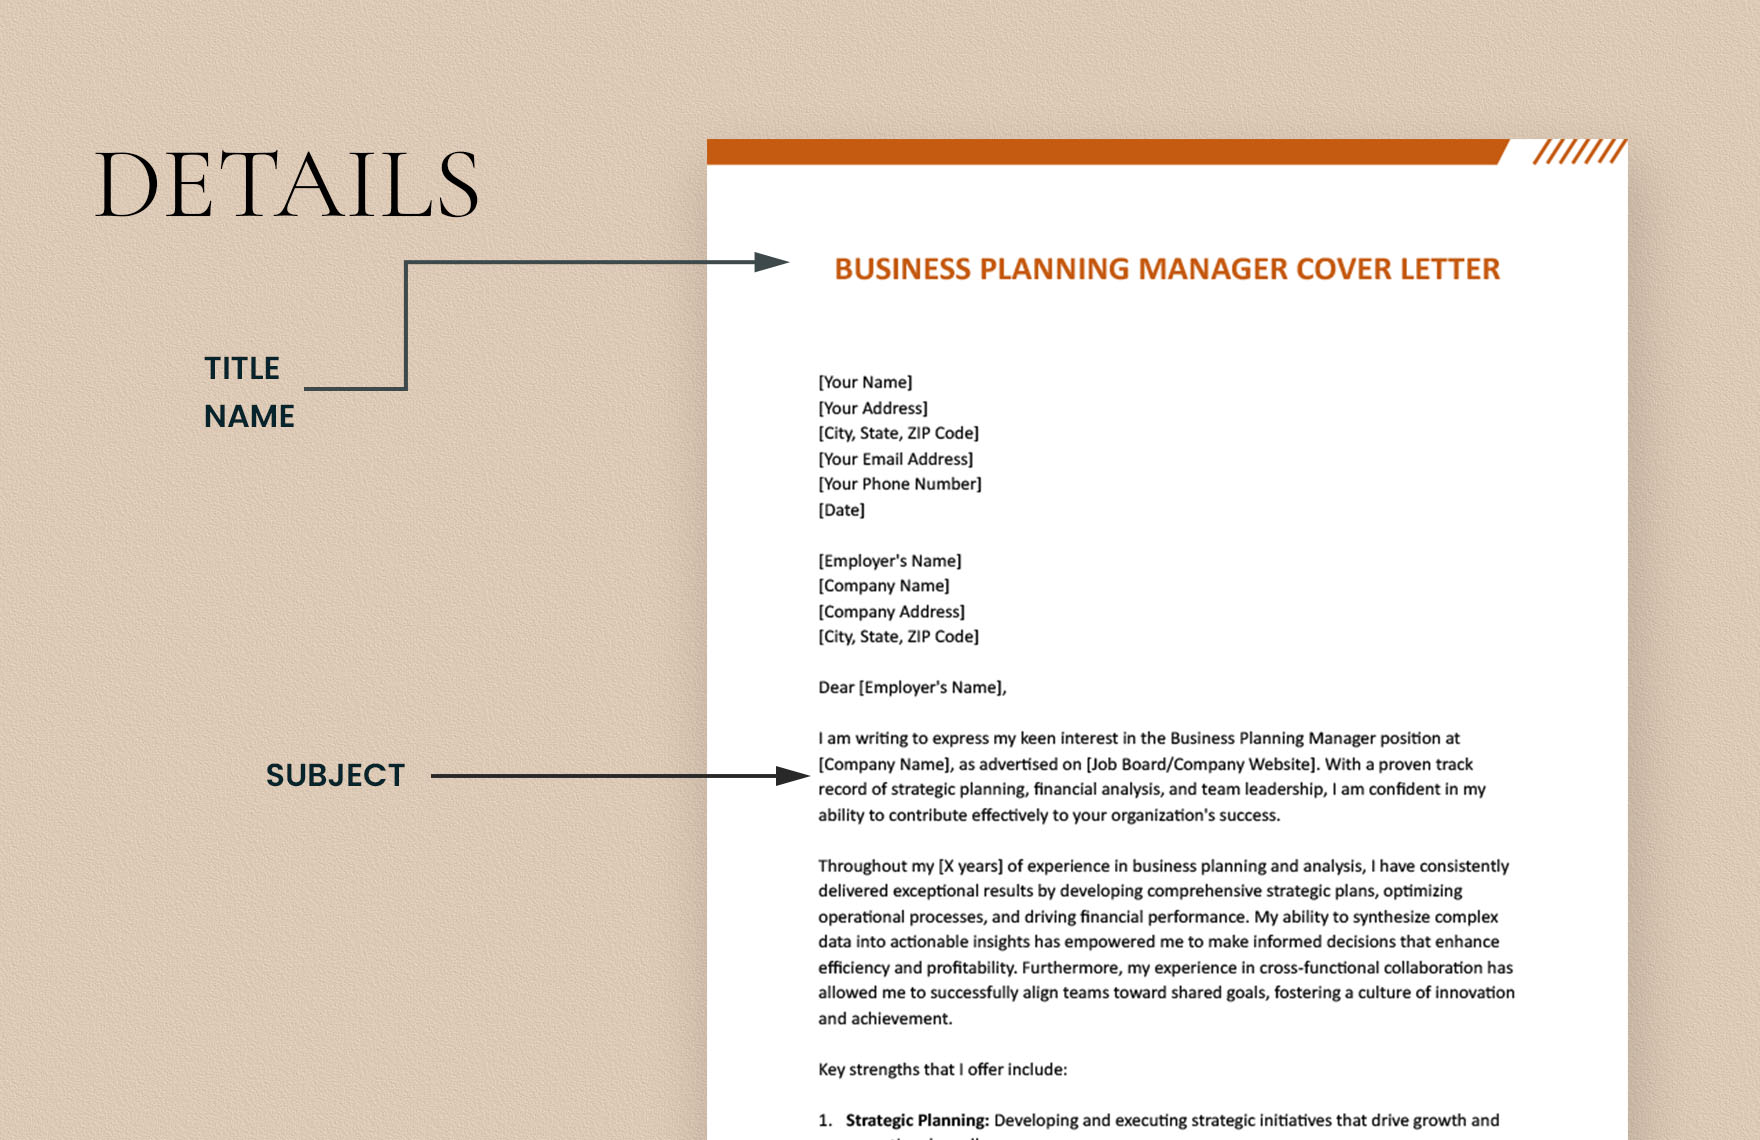 Business Planning Manager Cover Letter